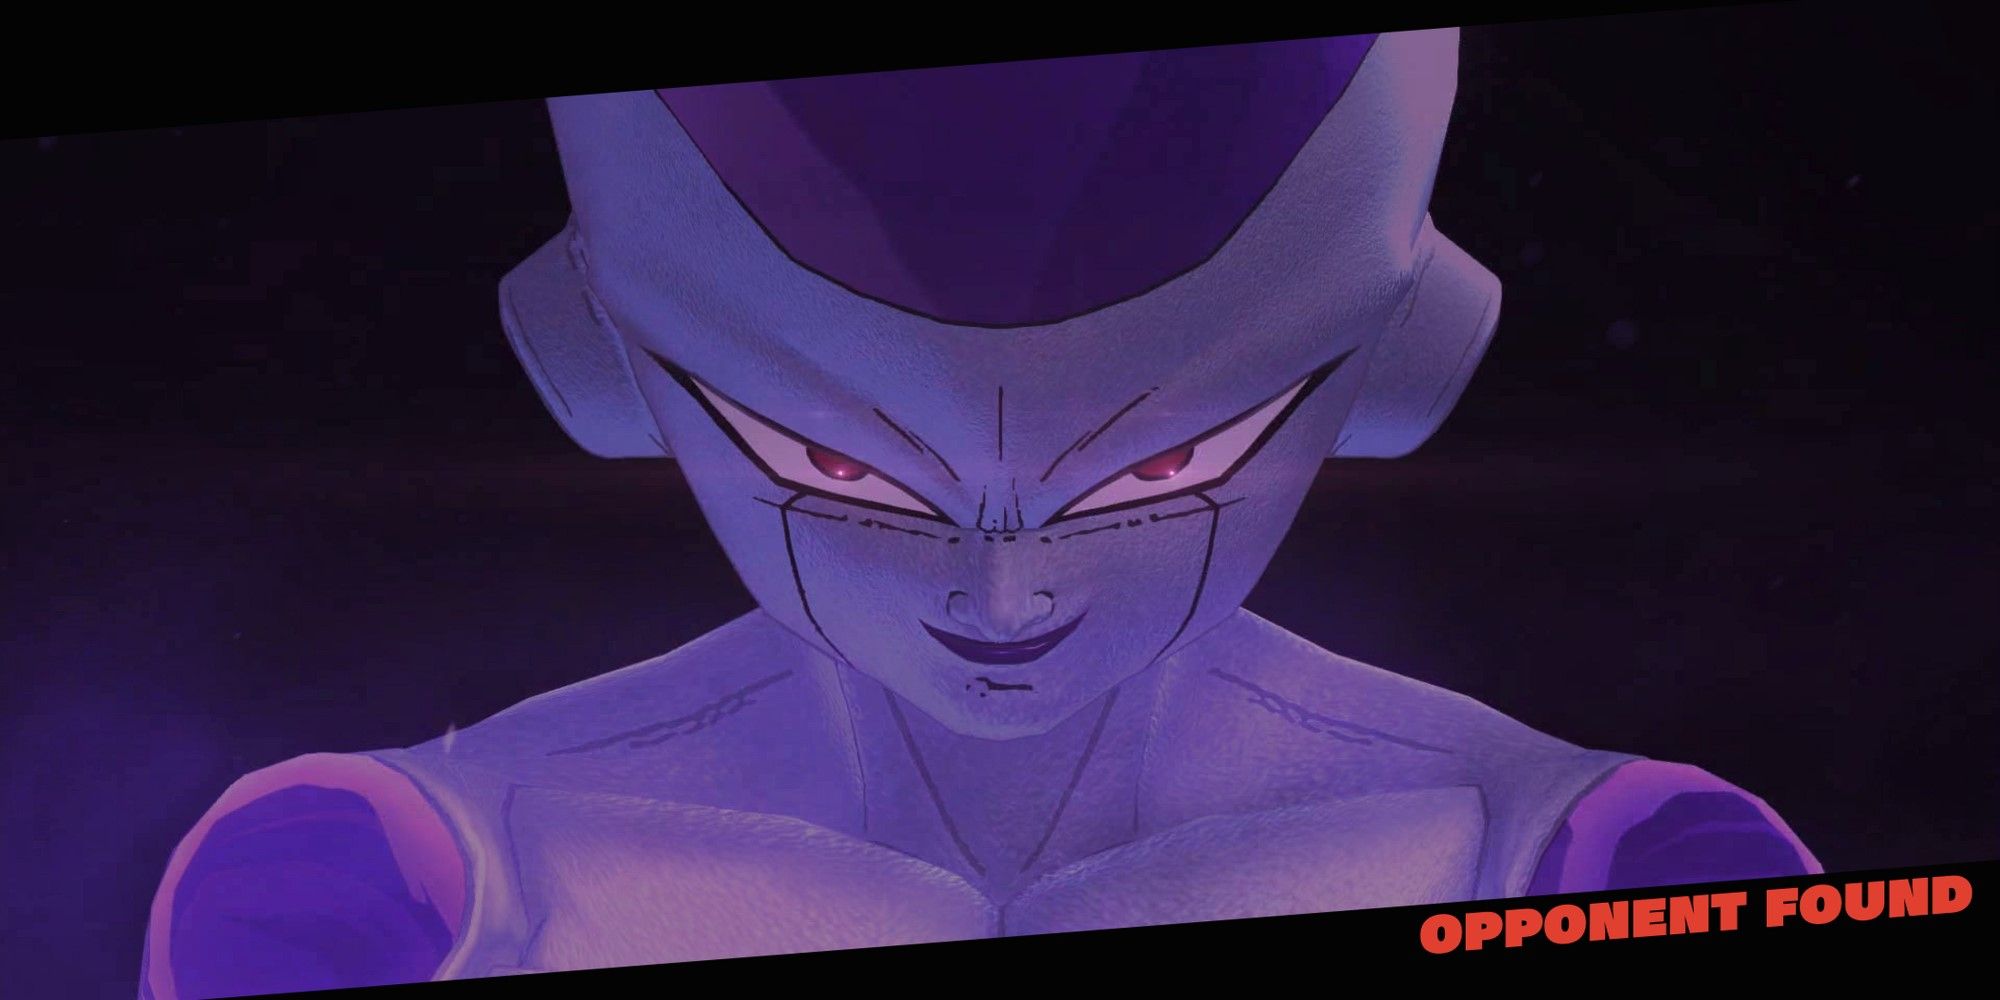 Raider Frieza's Dragon Ball opponent The Breakers has been found